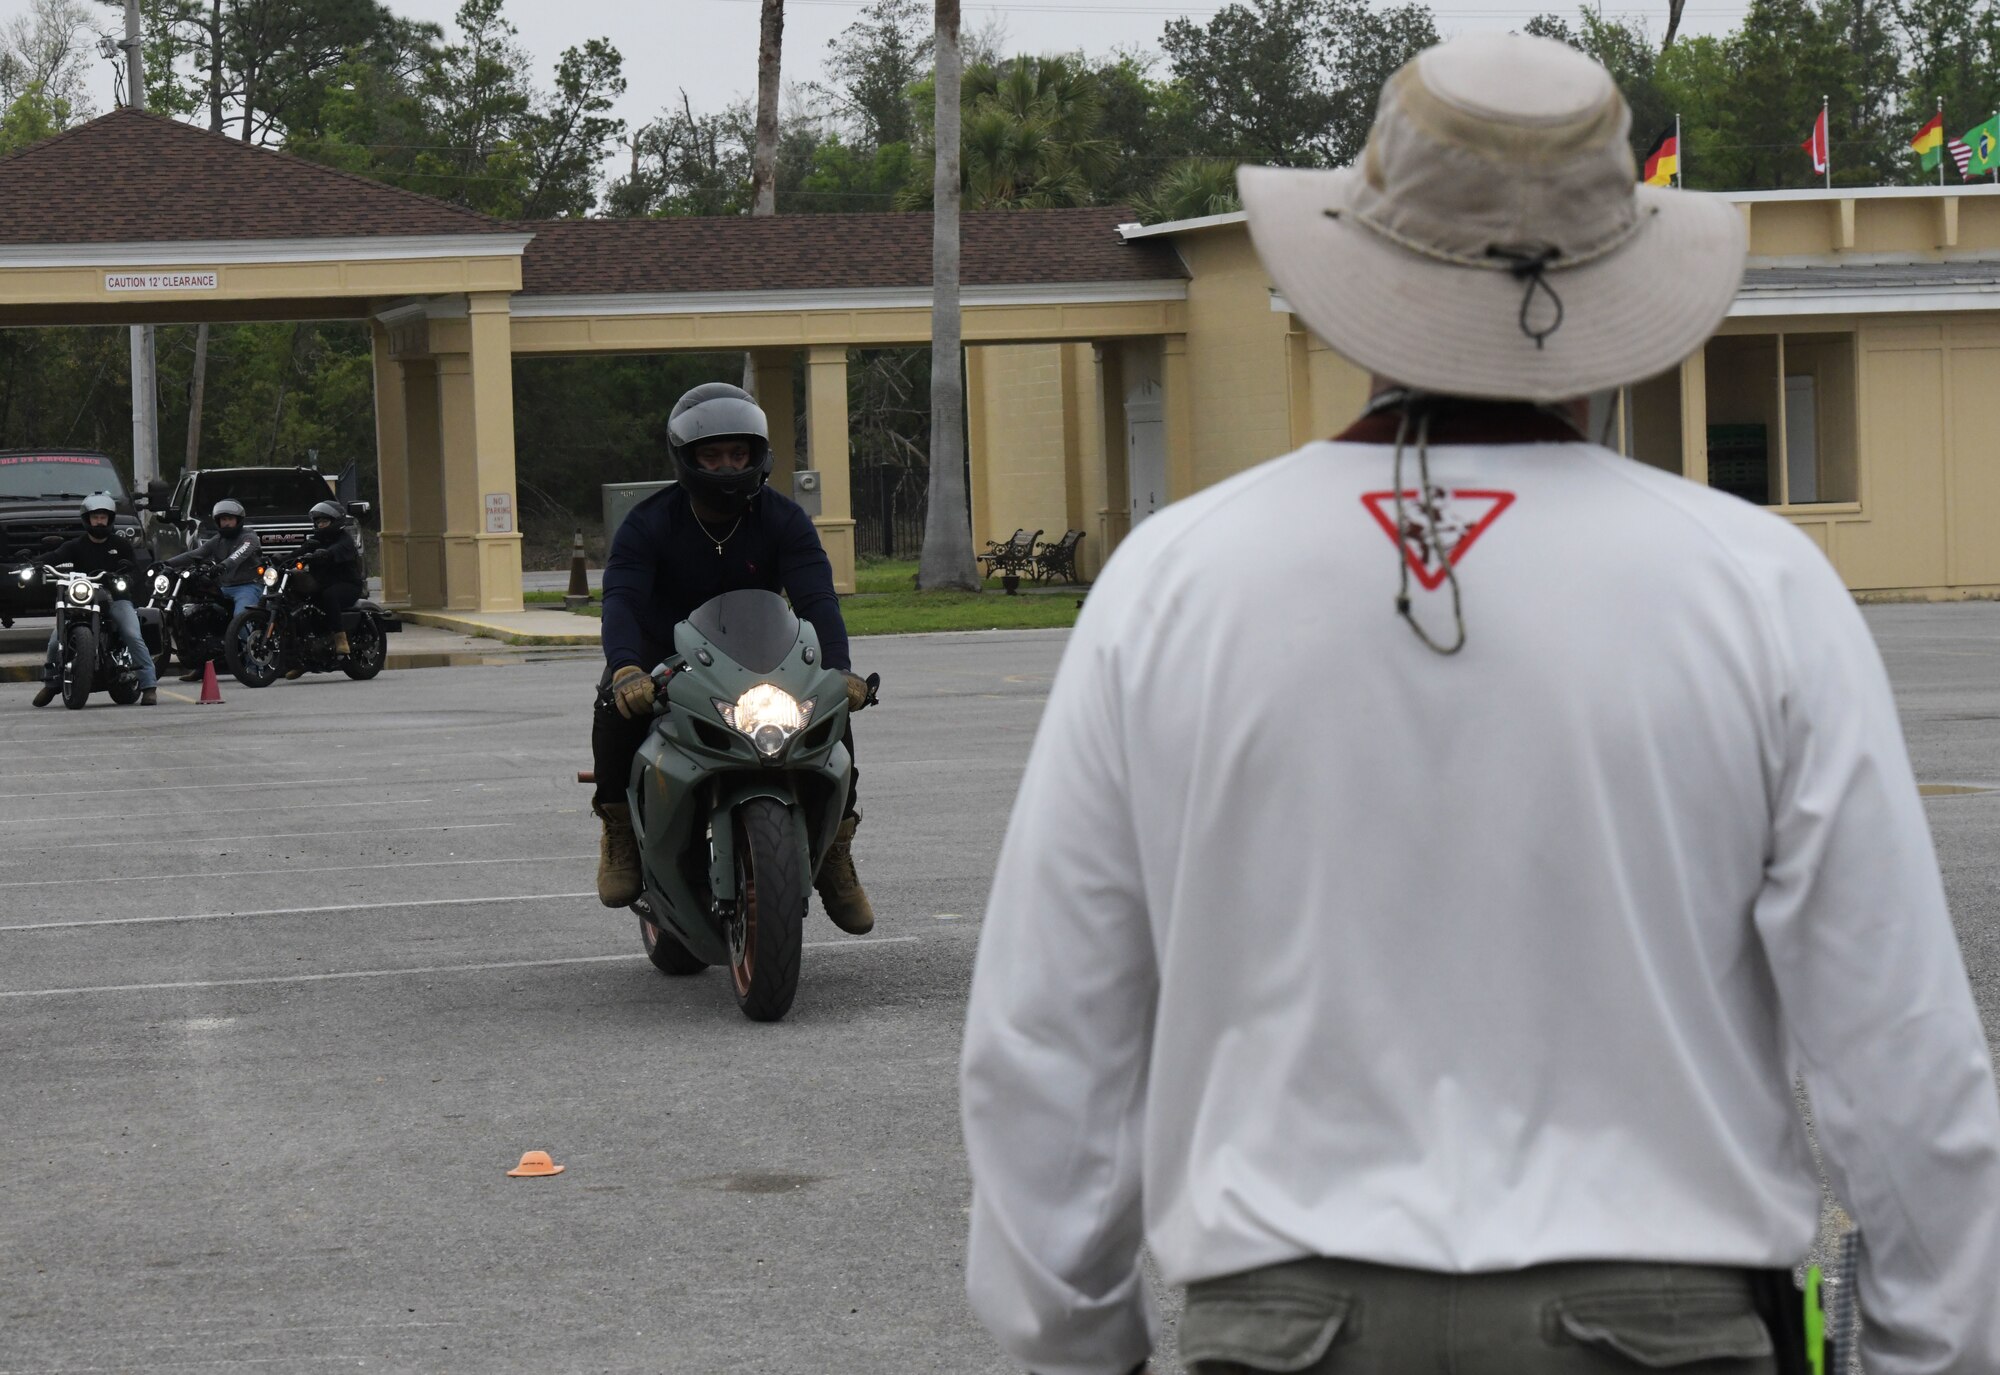 U.S. Air Force Senior Airman Ordavion McChristian, 325th Security Forces Squadron alarm monitor, approaches a motorcycle training coach to practice stopping procedures in Panama City, Florida, April 6, 2022.